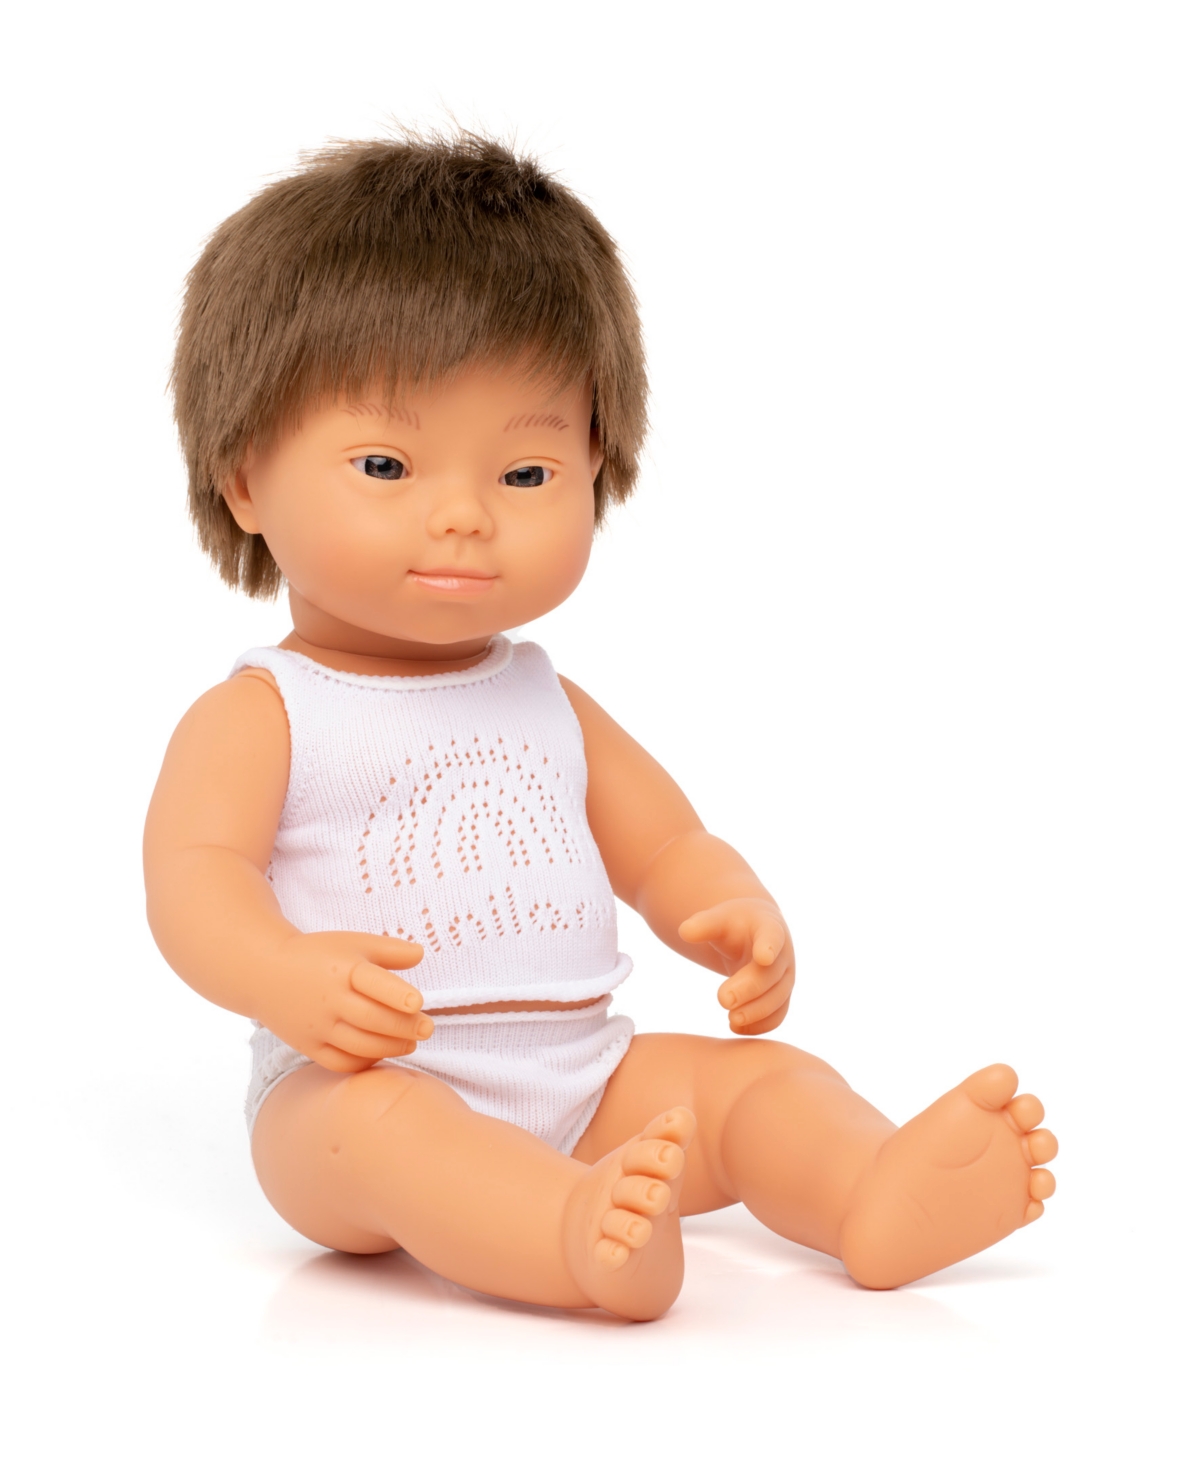 Miniland 15" Baby Doll Caucasian Boy With Down Syndrome Set, 3 Piece In No Color